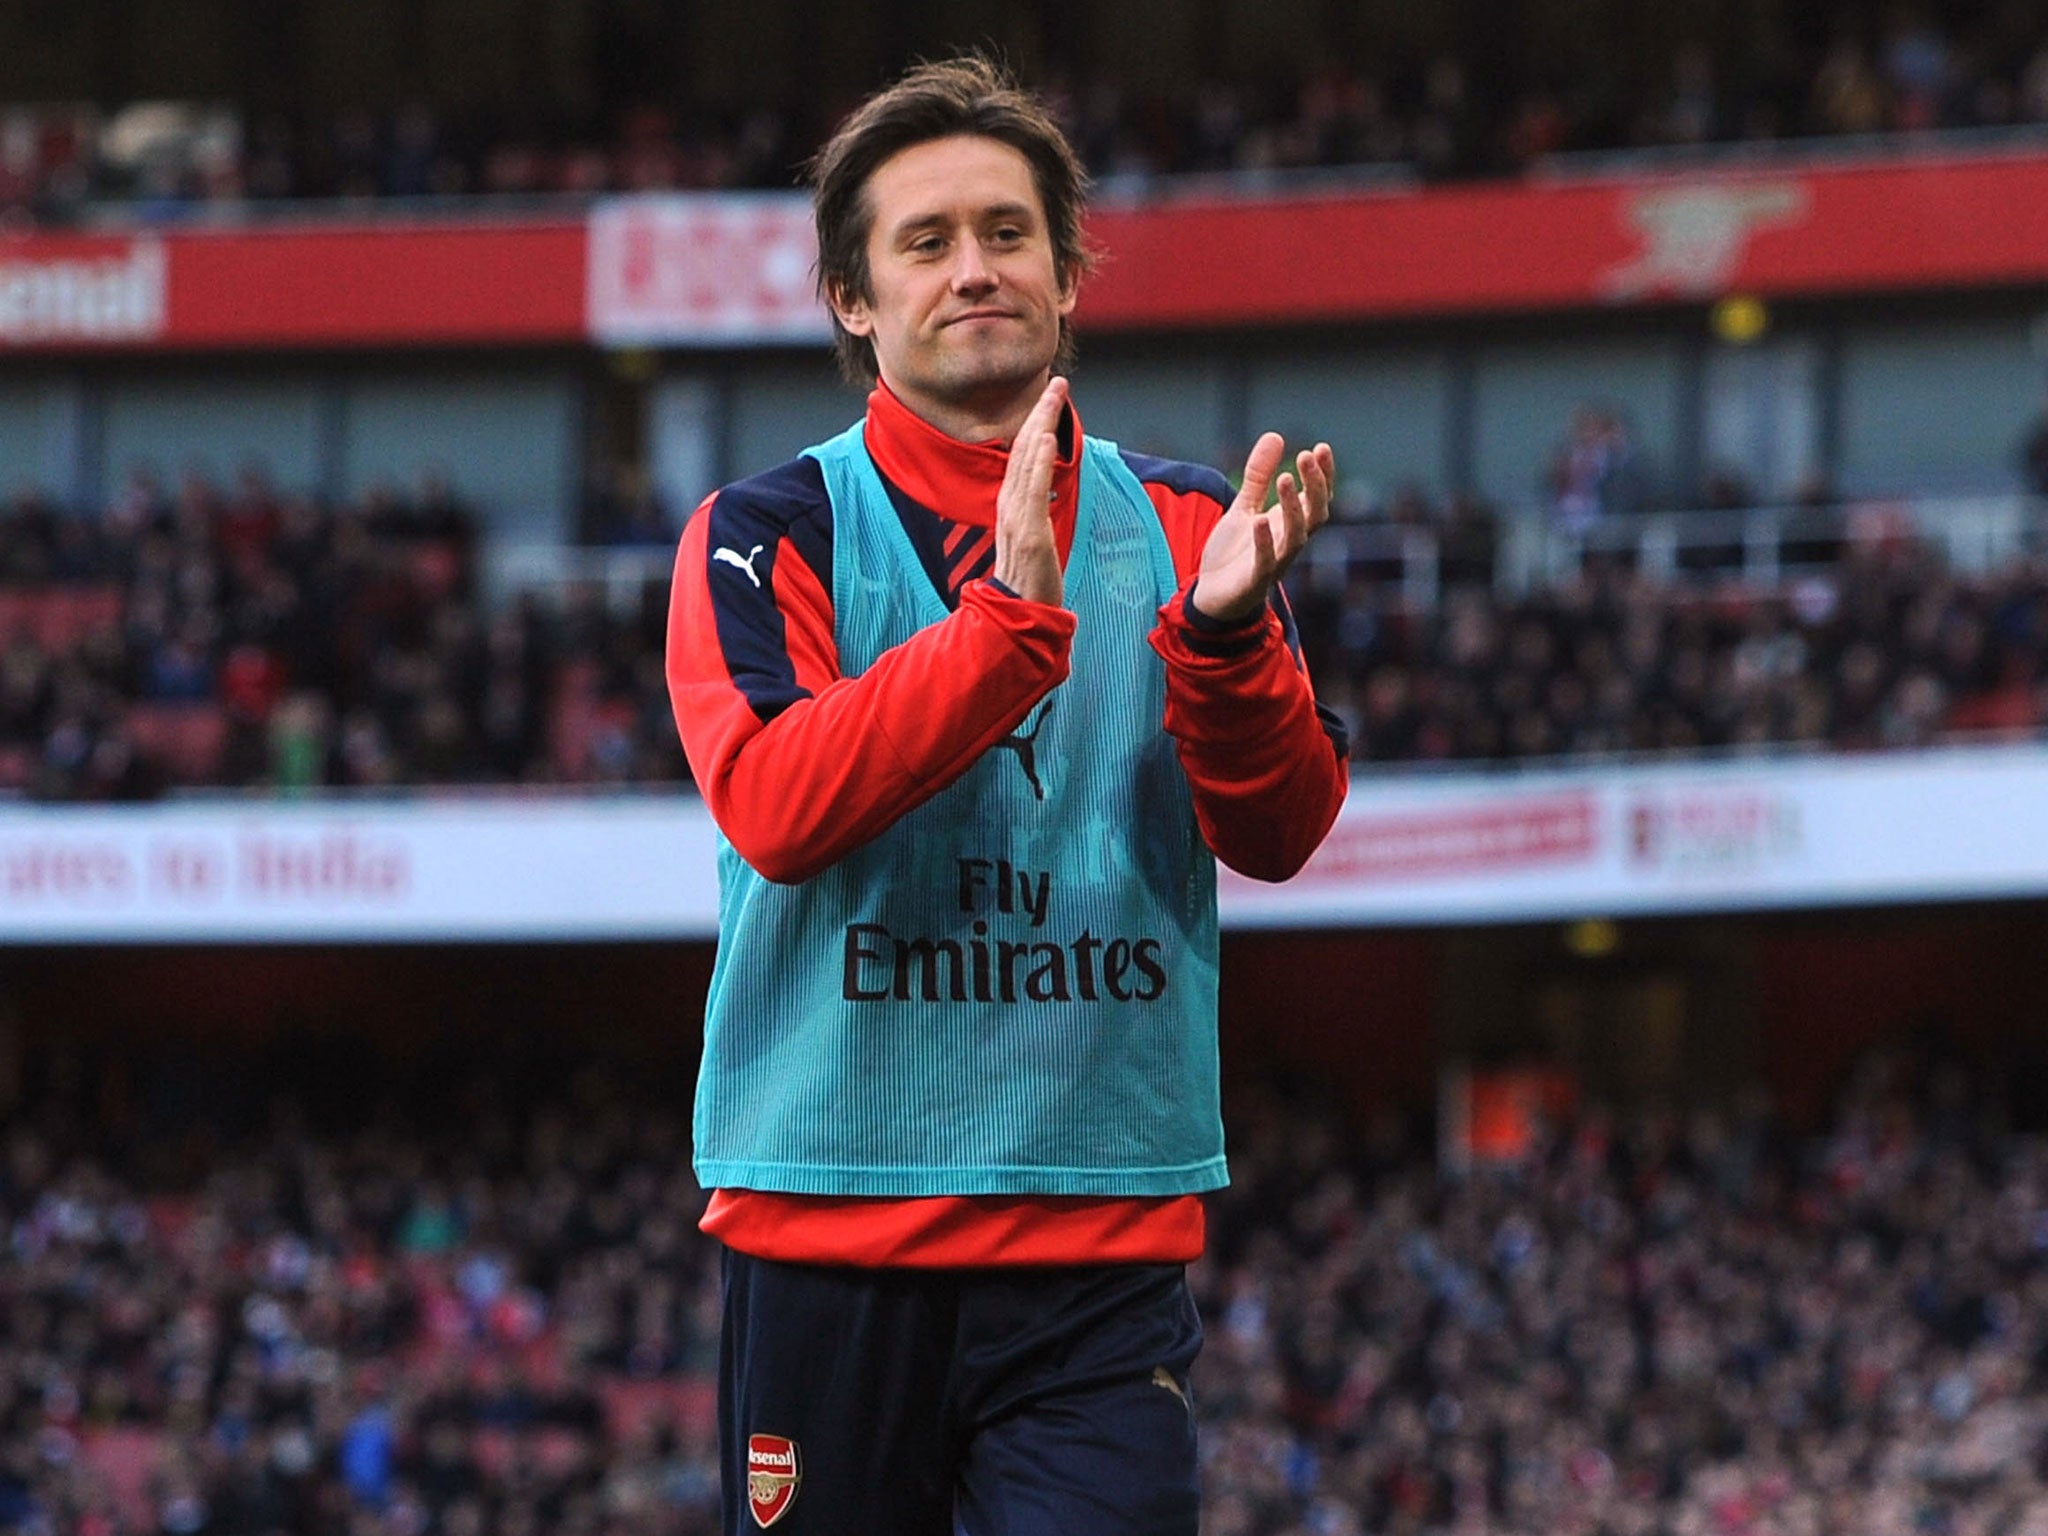 Tomas Rosicky suffered a thigh injury in the FA Cup win over Burnley